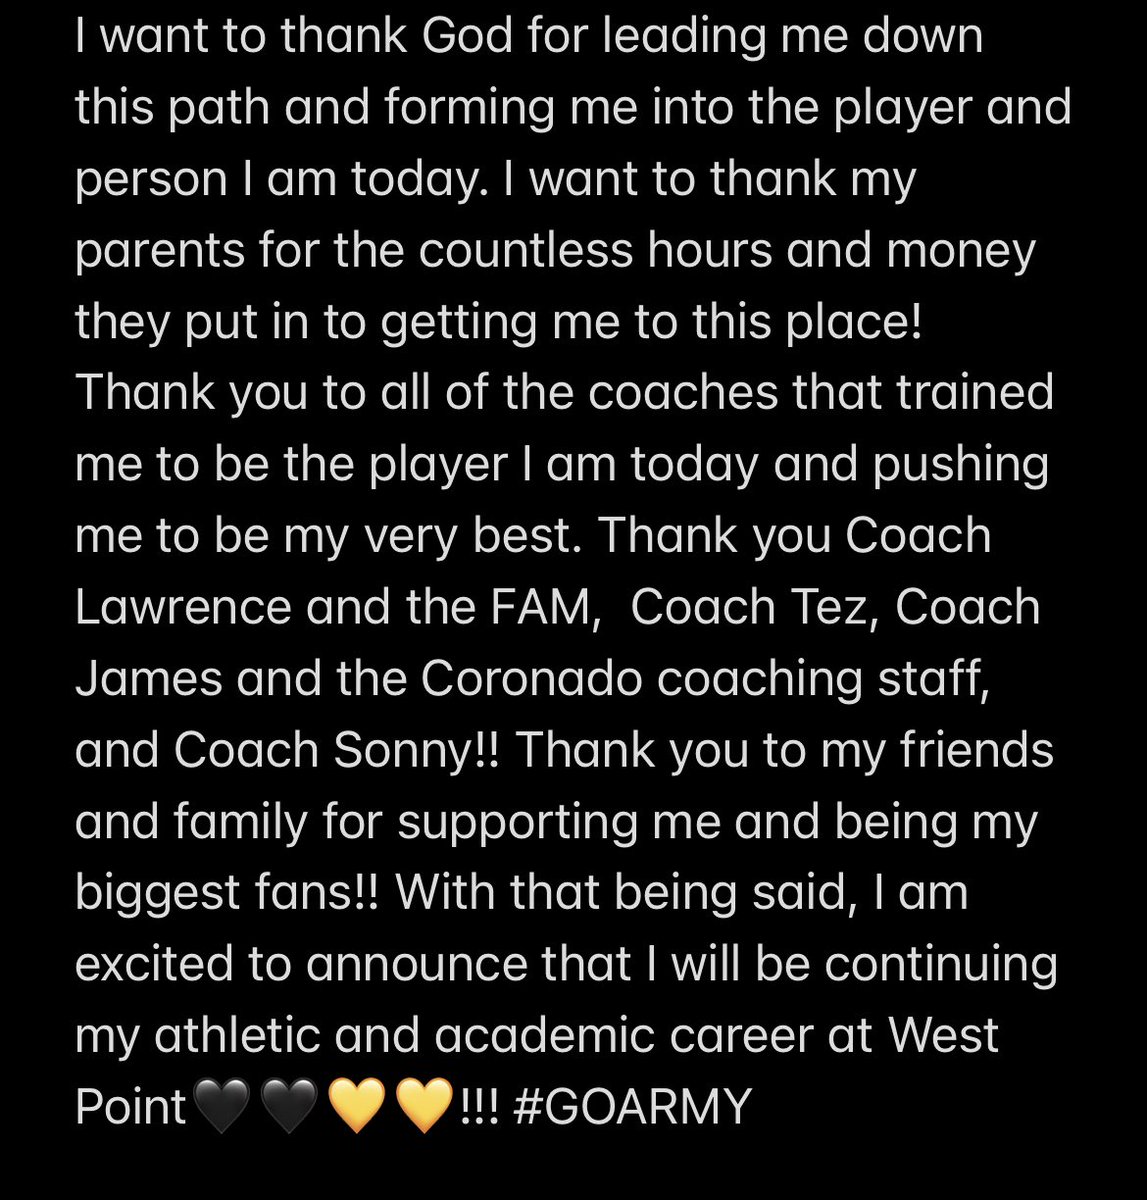 100% Committed #GOARMY Thank you @CoachTraversi and the staff at @ArmyWP_WBB for the opportunity!!